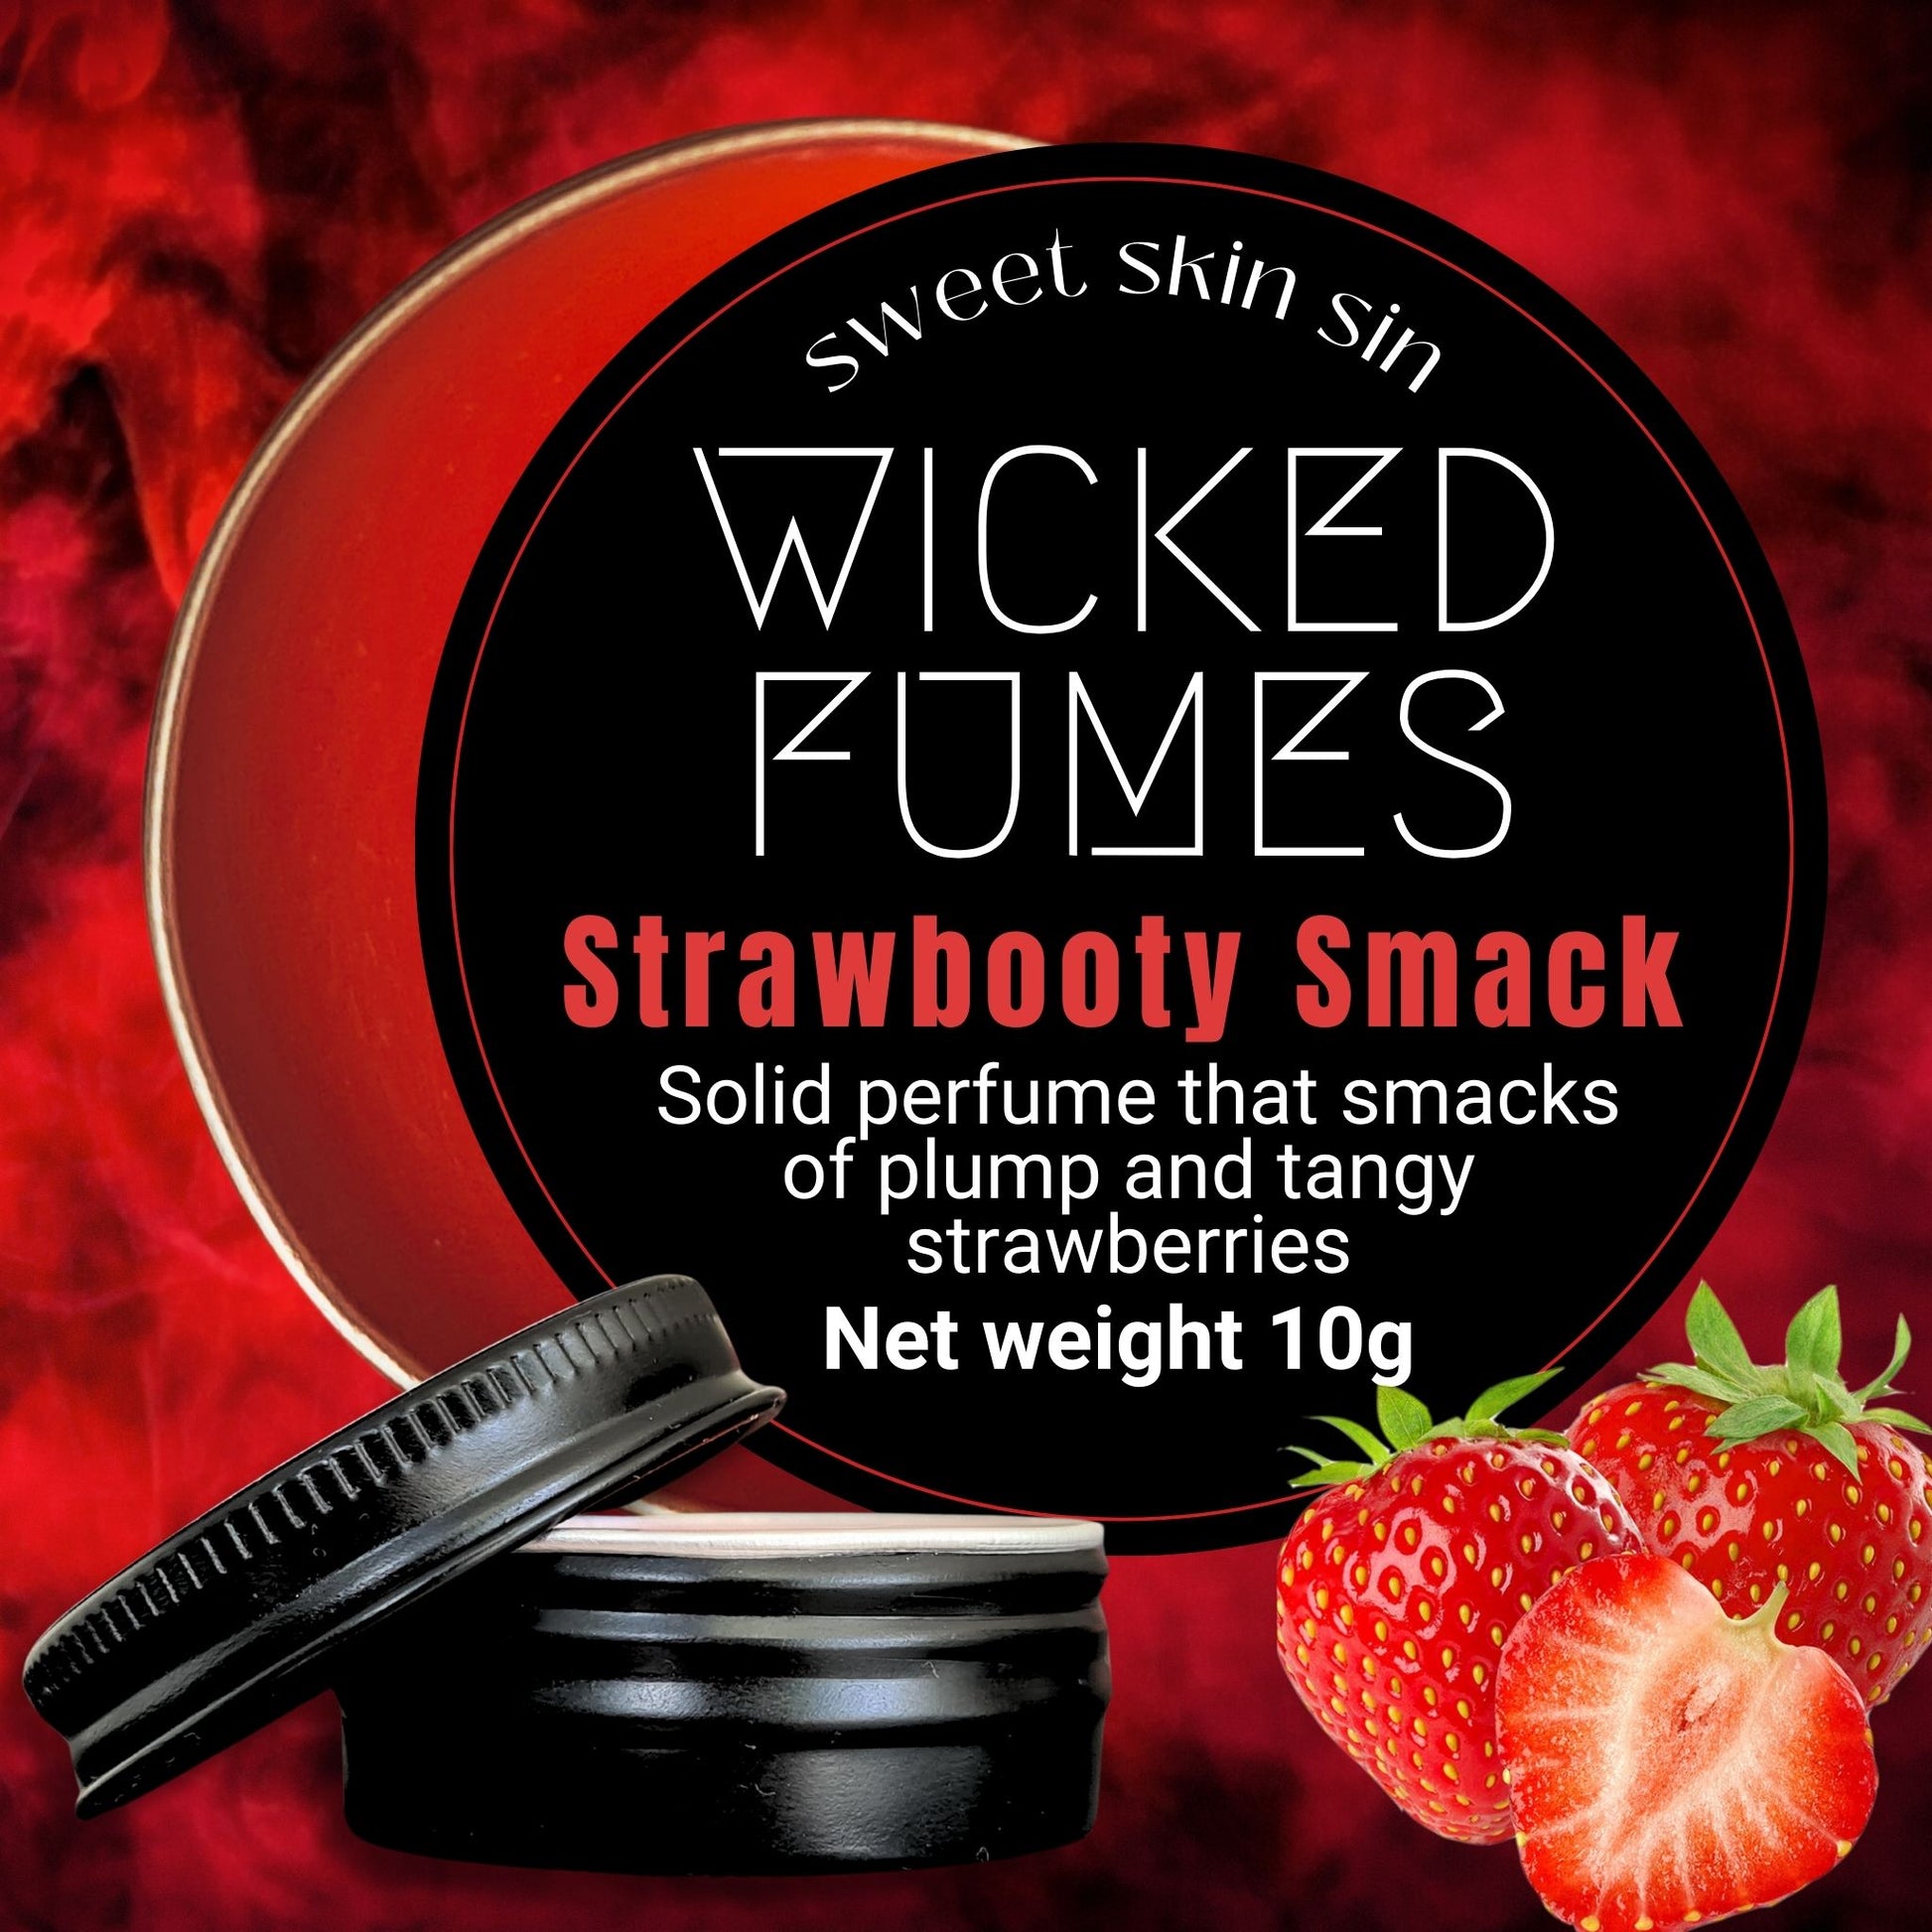 Image of a solid perfume Strawbooty Smack from Wicked Fumes in a small black round jar against a red smoke background with some strawberries pictured